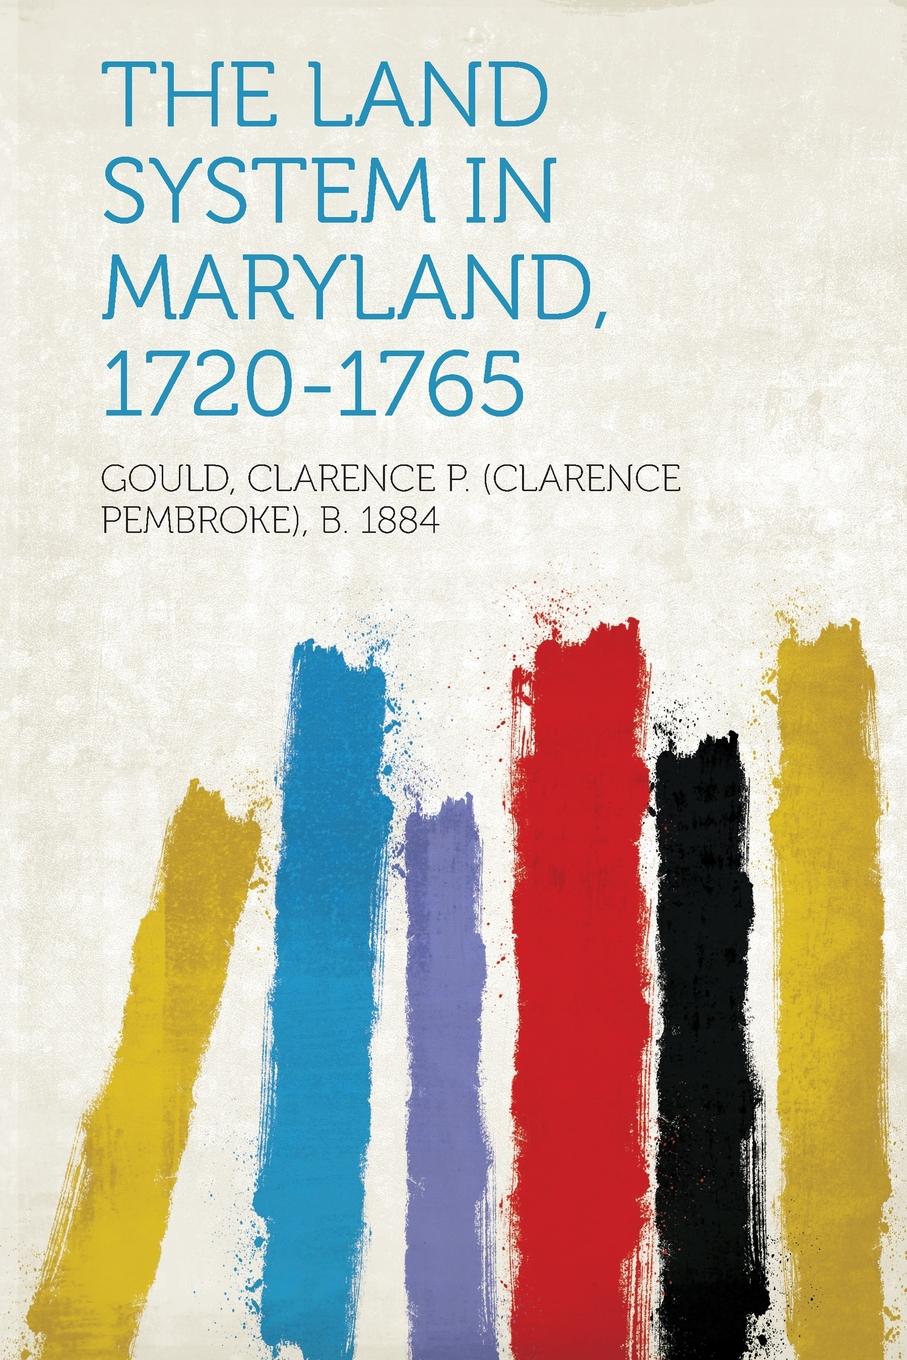 The Land System in Maryland, 1720-1765